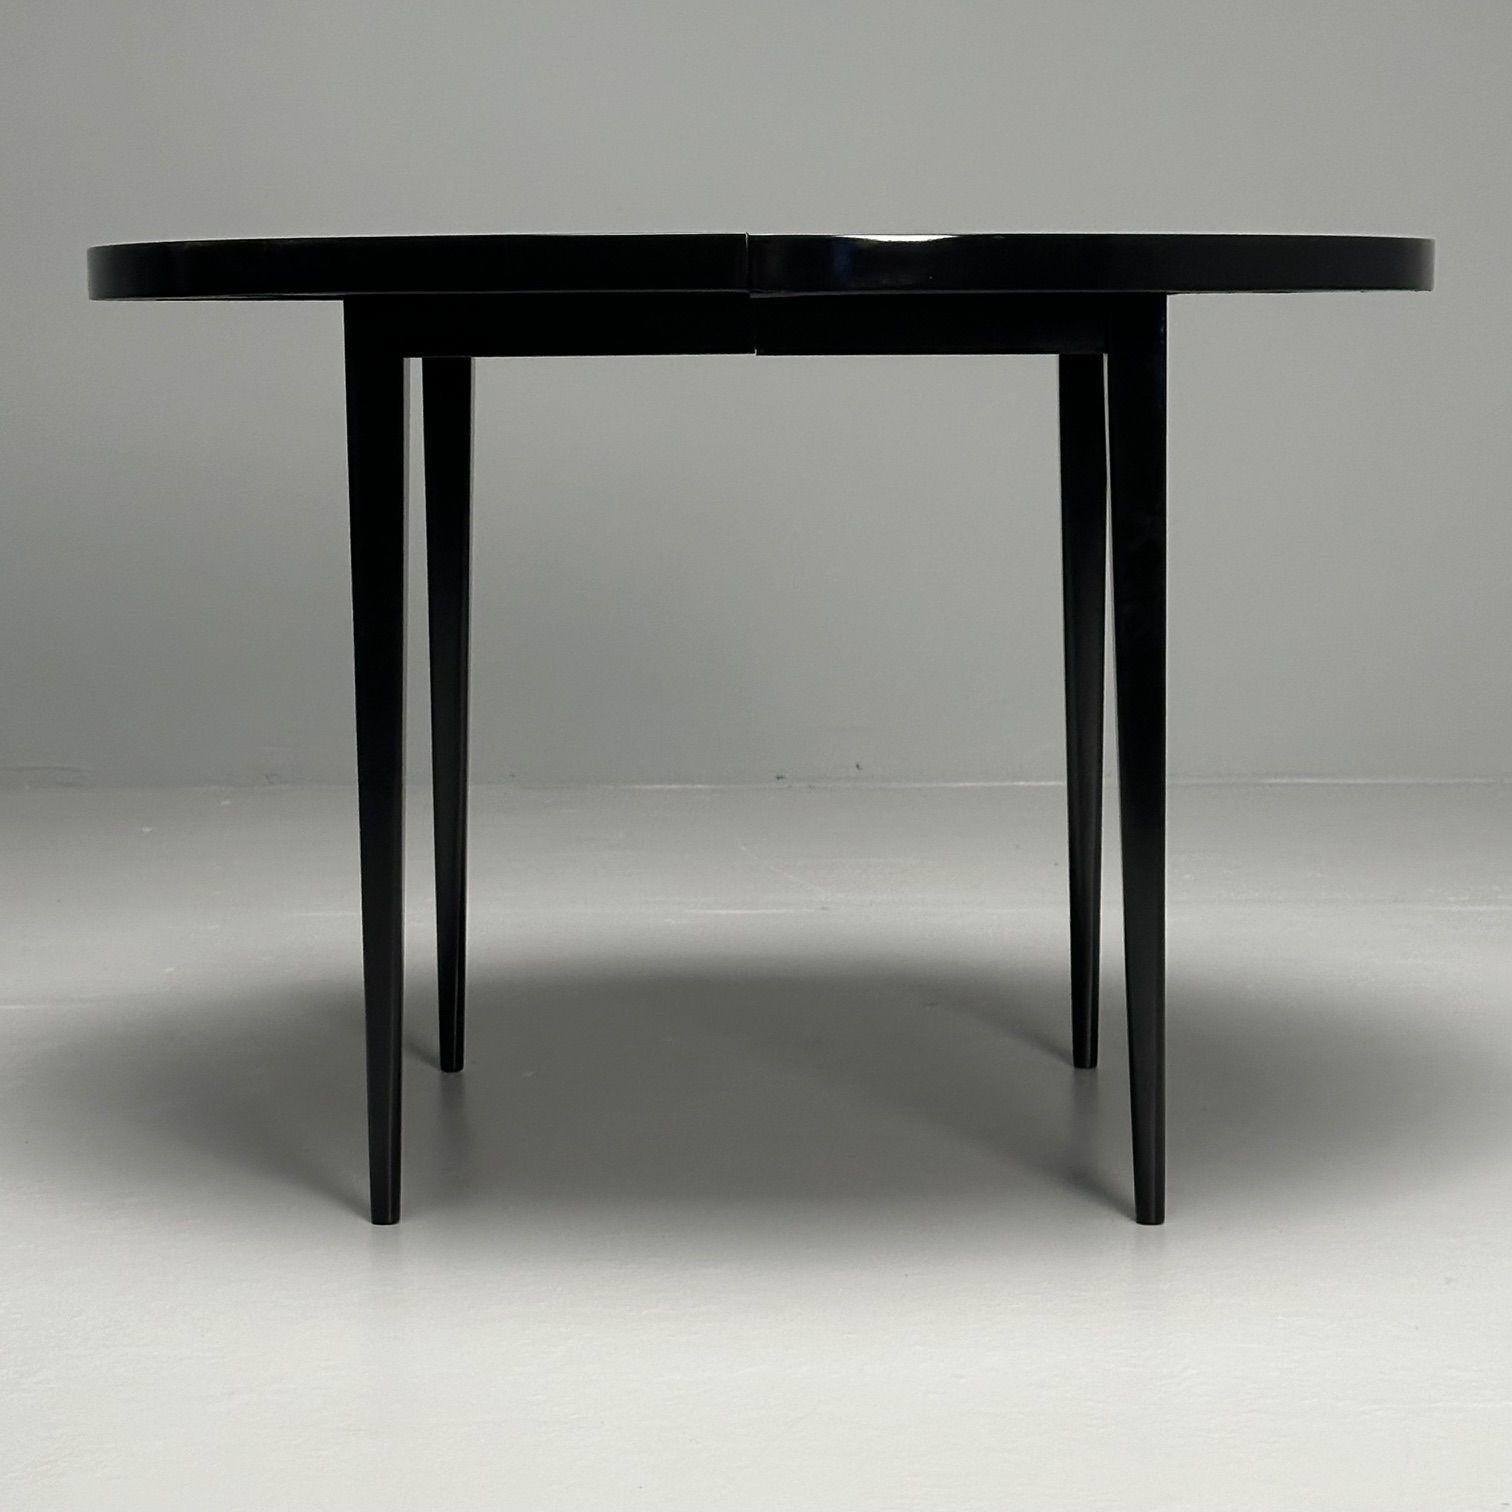 Paul McCobb, Mid-Century Modern Planner Group Dining Table, Black Lacquer, 1950s For Sale 5